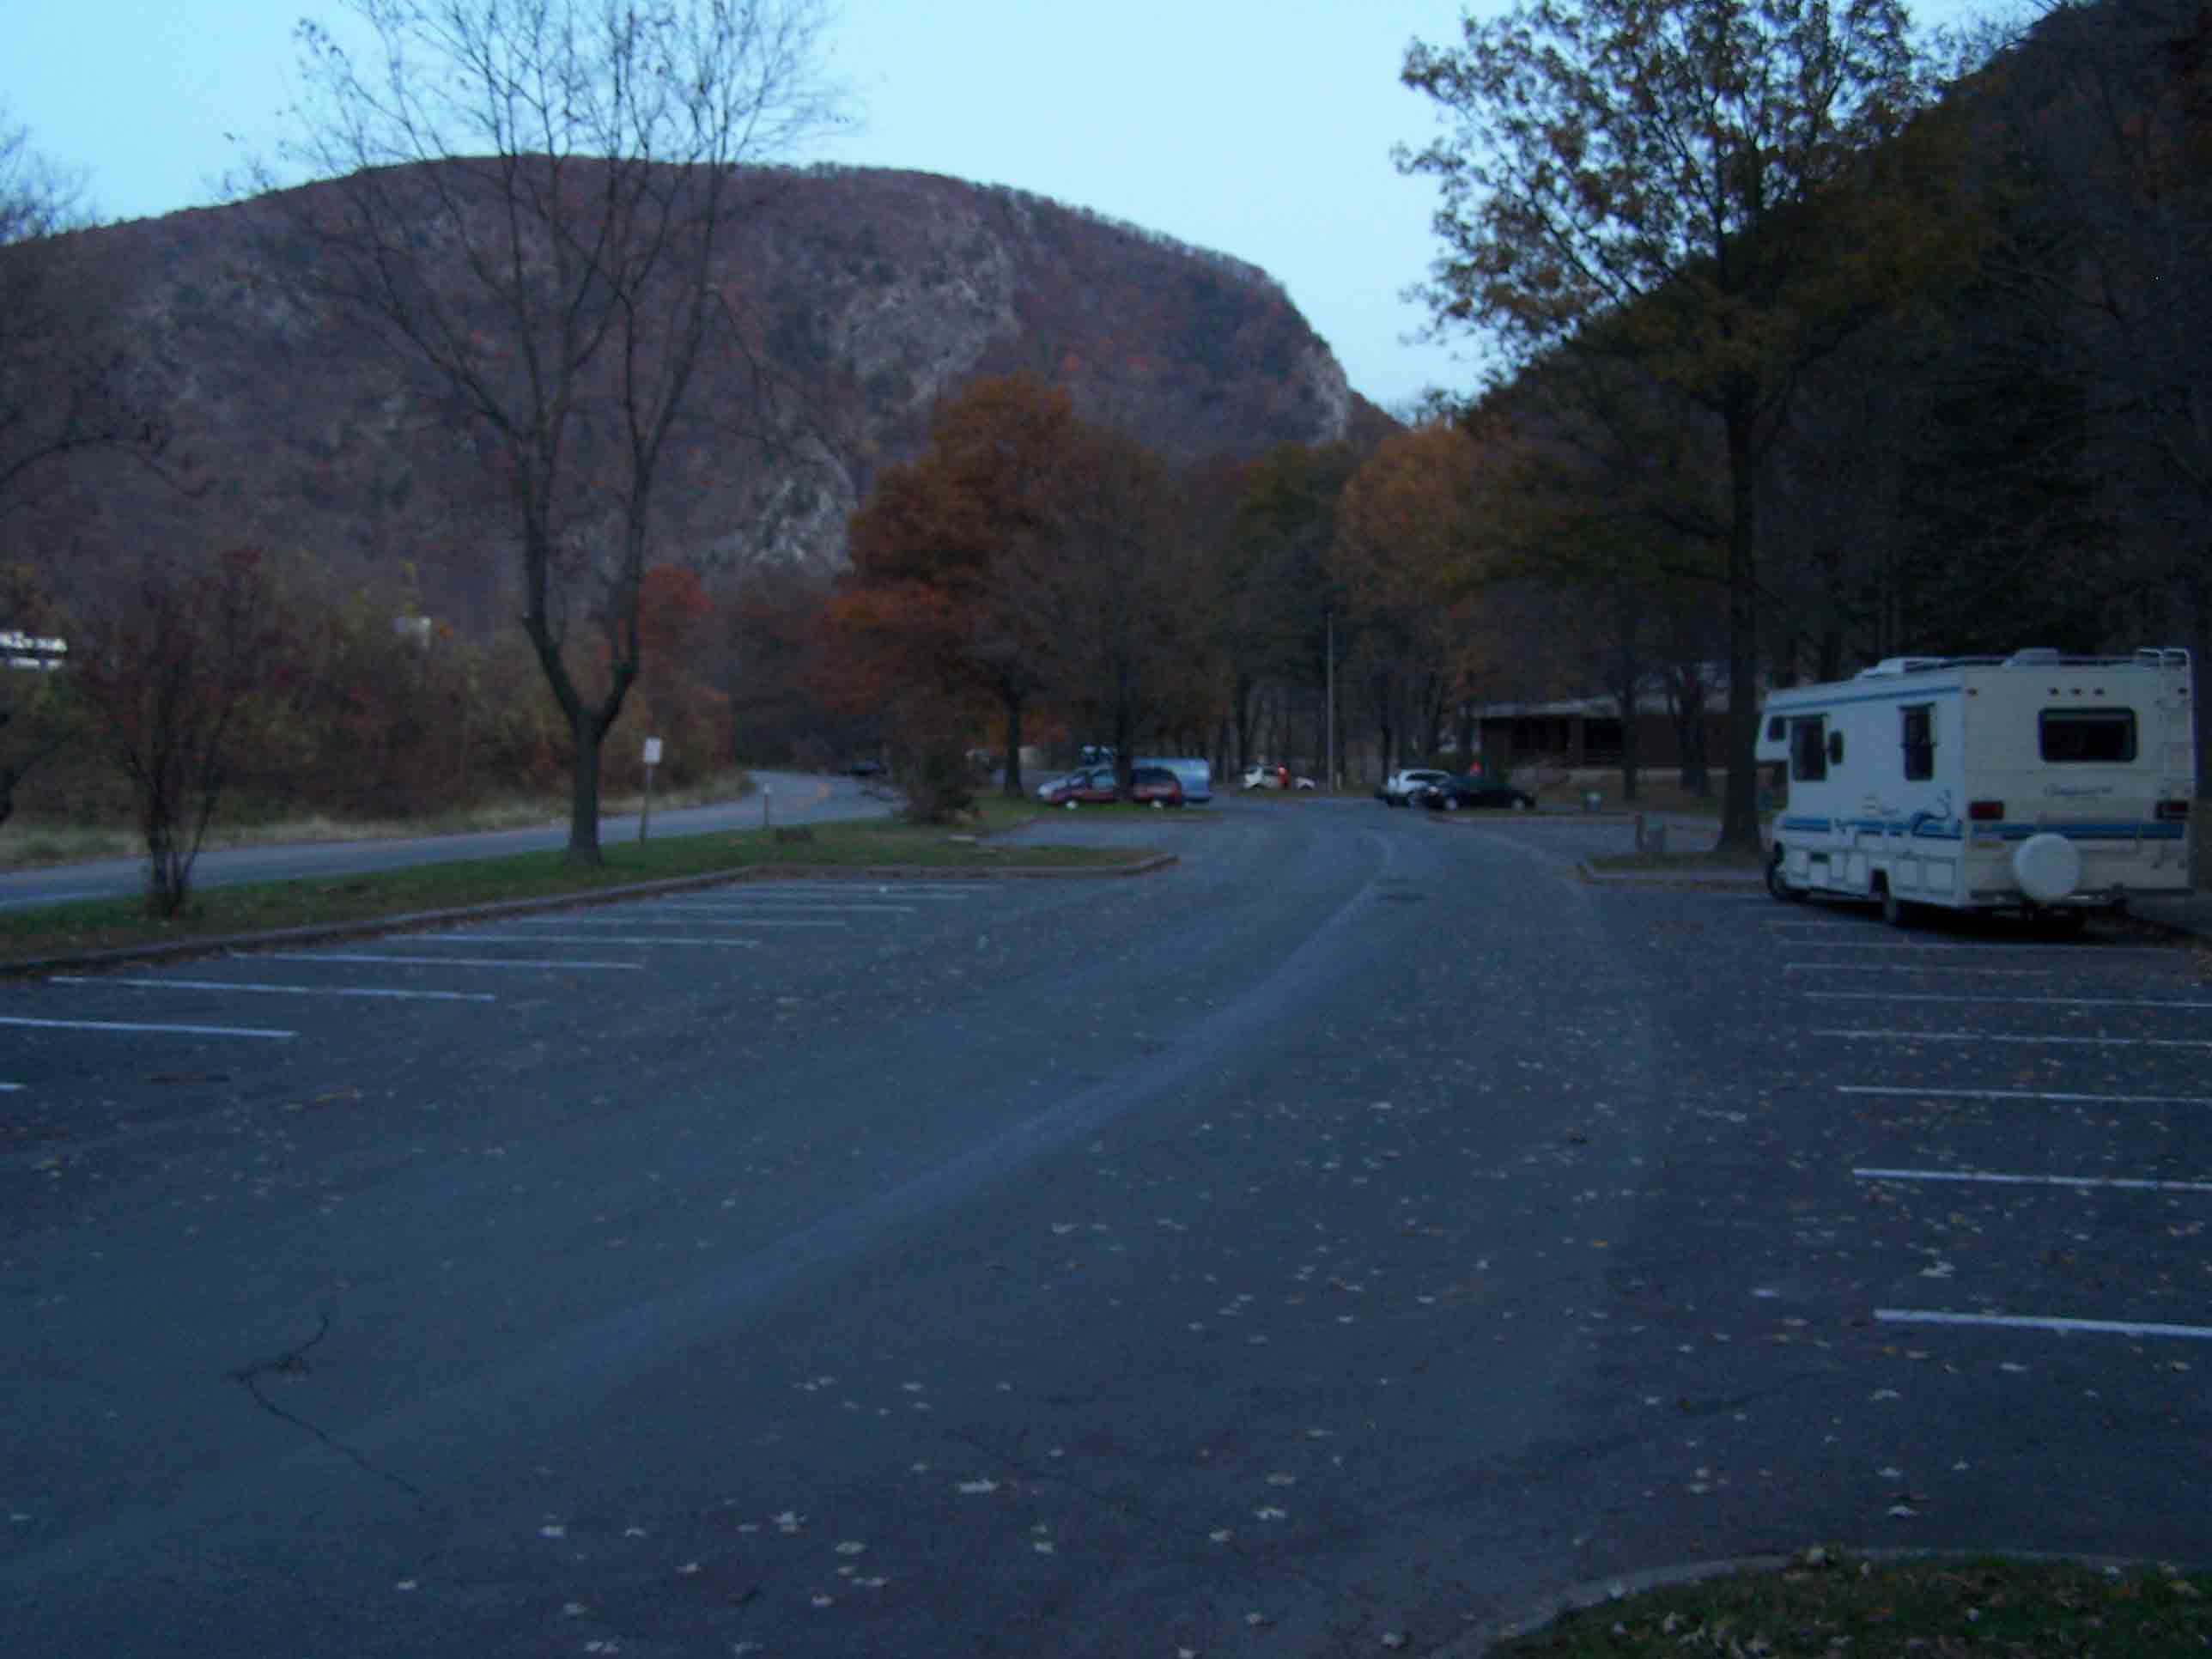 mm 12.5 Parking at Delaware Water Gap Recreation Visitor Center - the center closed after 6/06 flooding but is now re-opened. Courtesy at@rohland.org